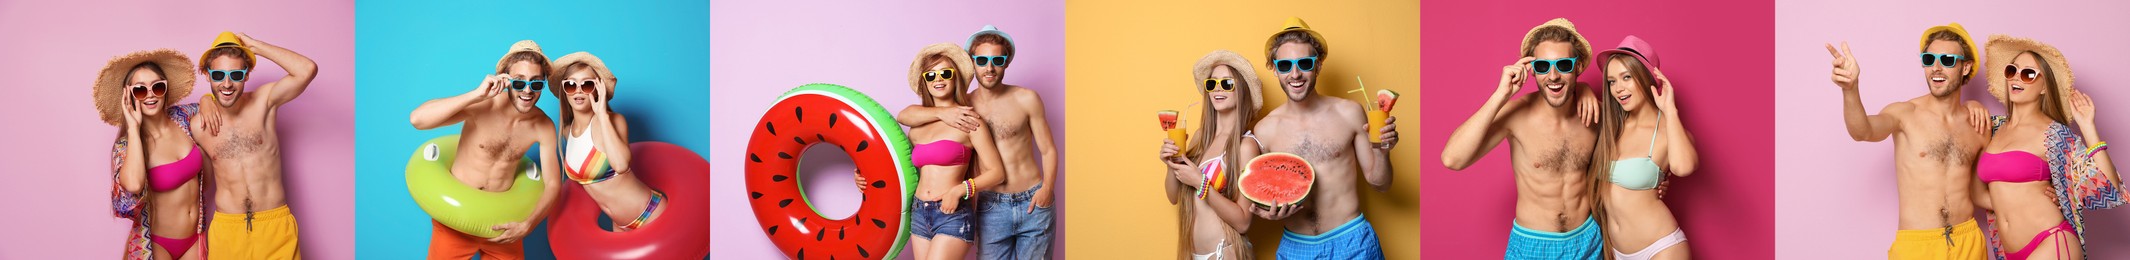 Collage with beautiful photos themed to summer party and vacation. Happy young couples wearing beachwear on different color backgrounds, banner design